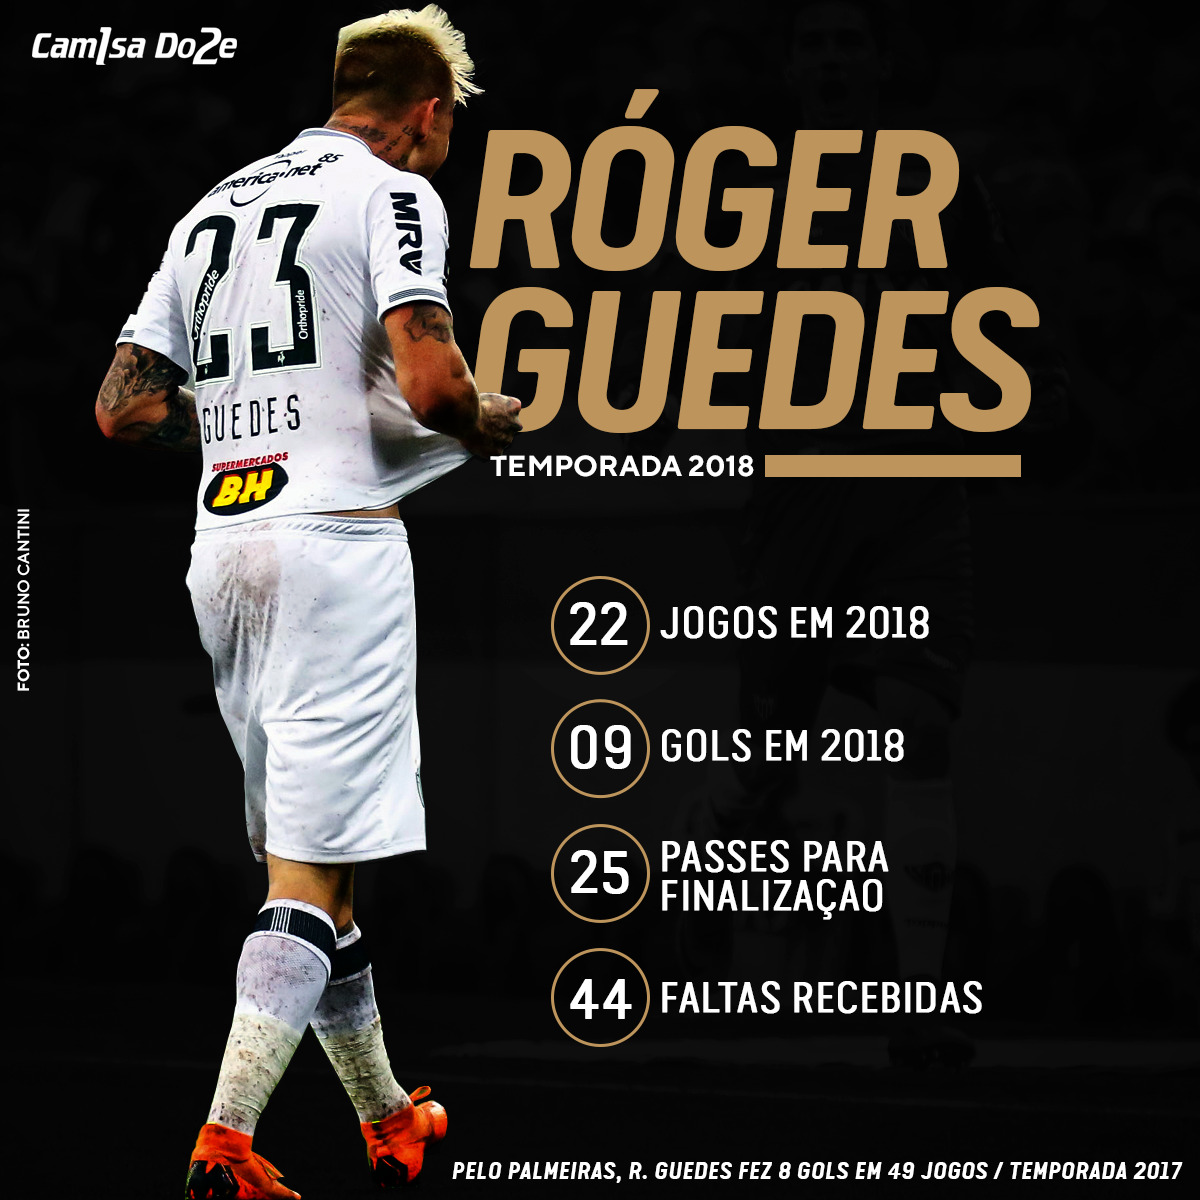 roger guedes bullief